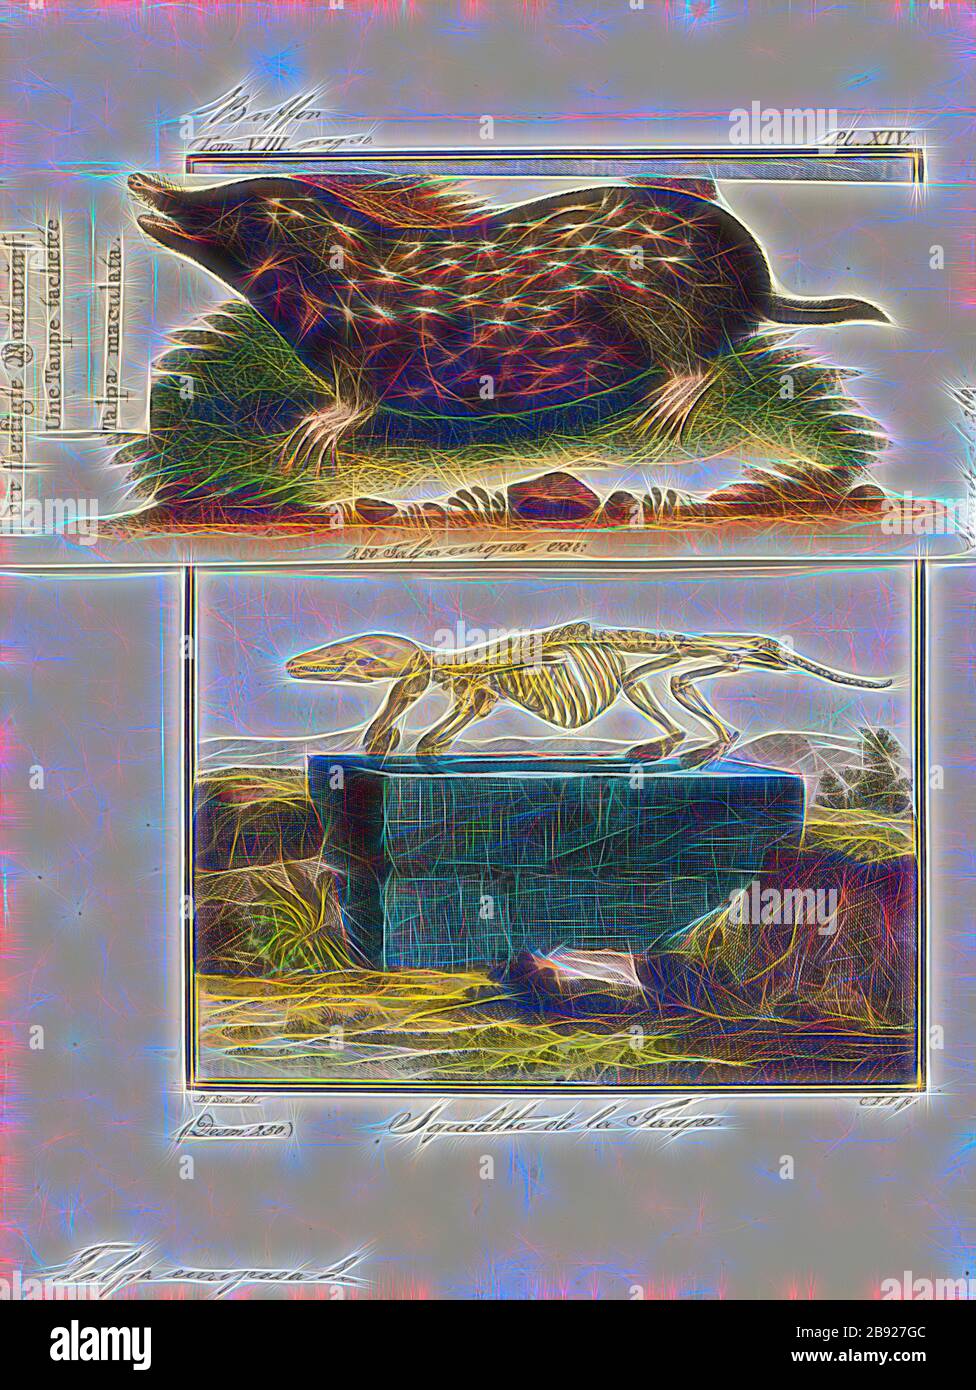 Talpa europaea, Print, The European mole (Talpa europaea) is a mammal of the order Eulipotyphla. It is also known as the common mole and the northern mole., skeleton, Reimagined by Gibon, design of warm cheerful glowing of brightness and light rays radiance. Classic art reinvented with a modern twist. Photography inspired by futurism, embracing dynamic energy of modern technology, movement, speed and revolutionize culture. Stock Photo